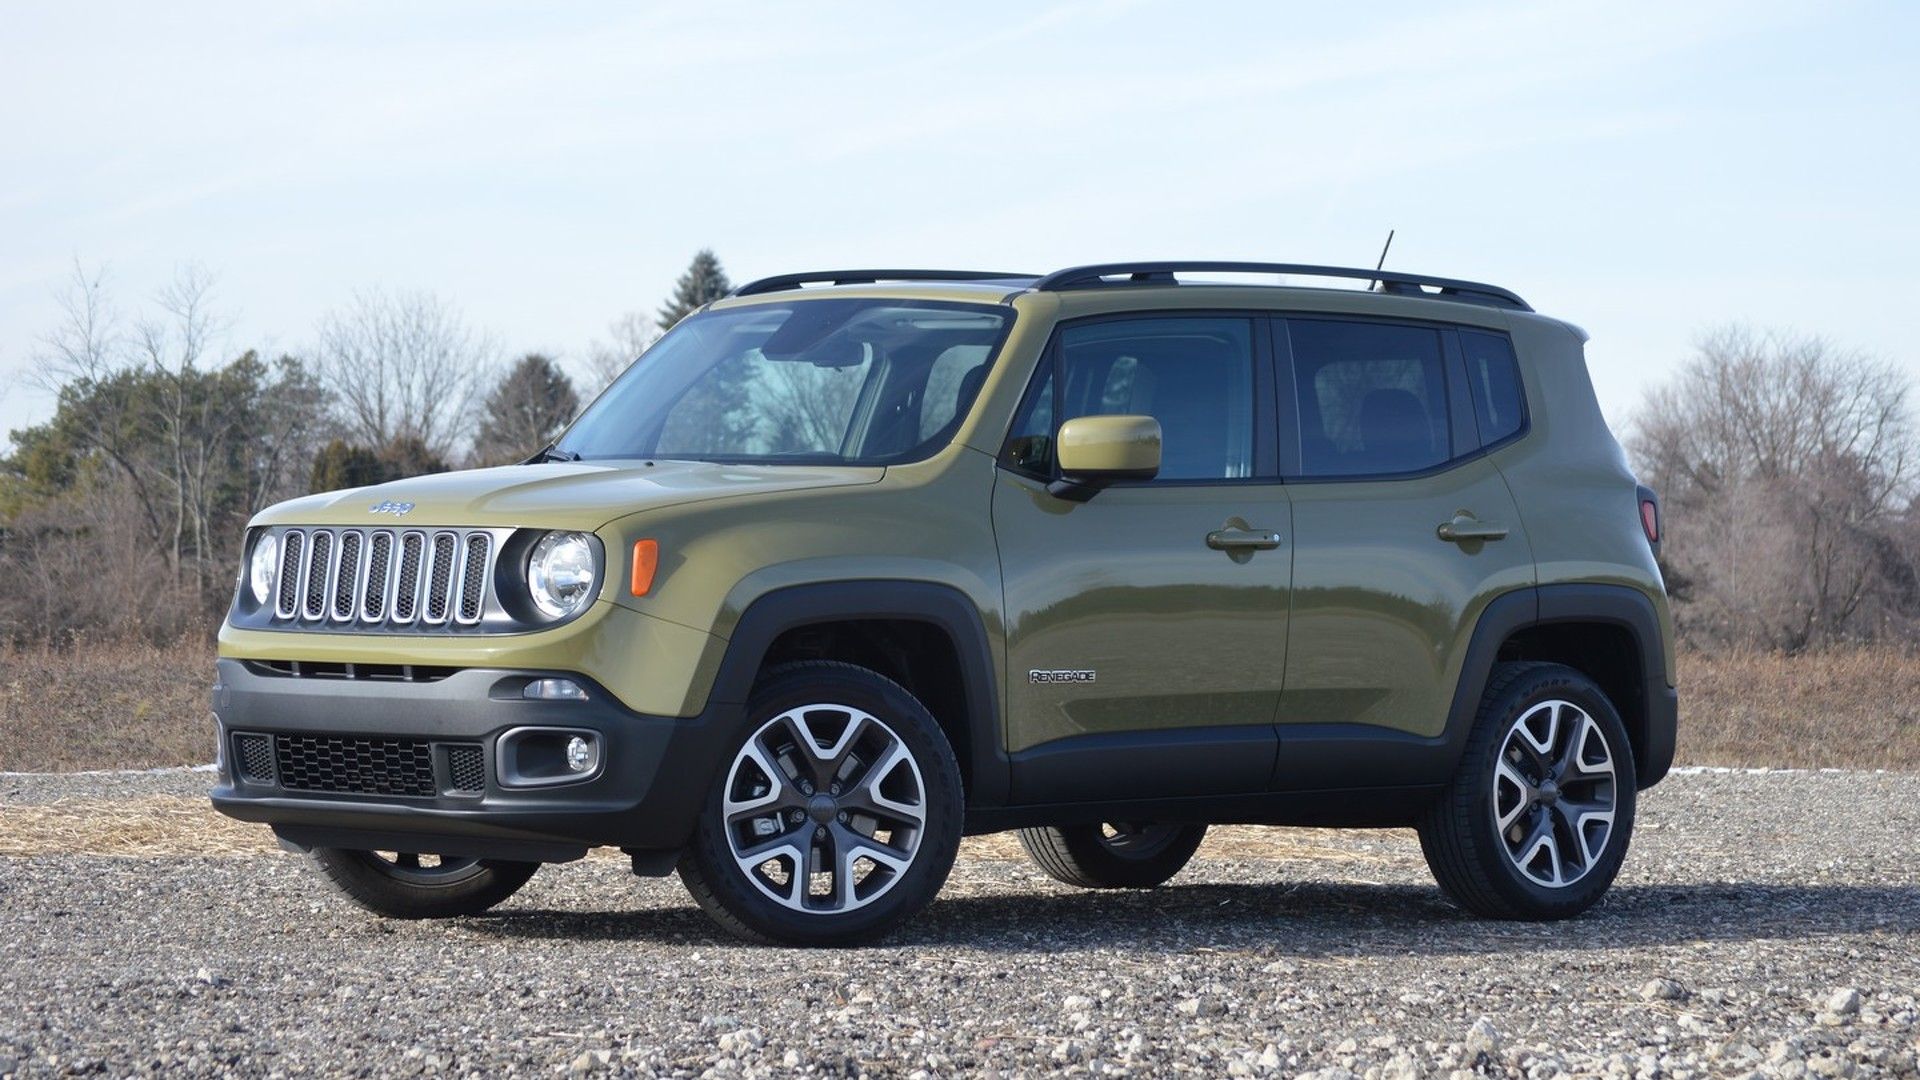 Beige Brown 2016 Jeep Renegade affordable compact SUV off-road